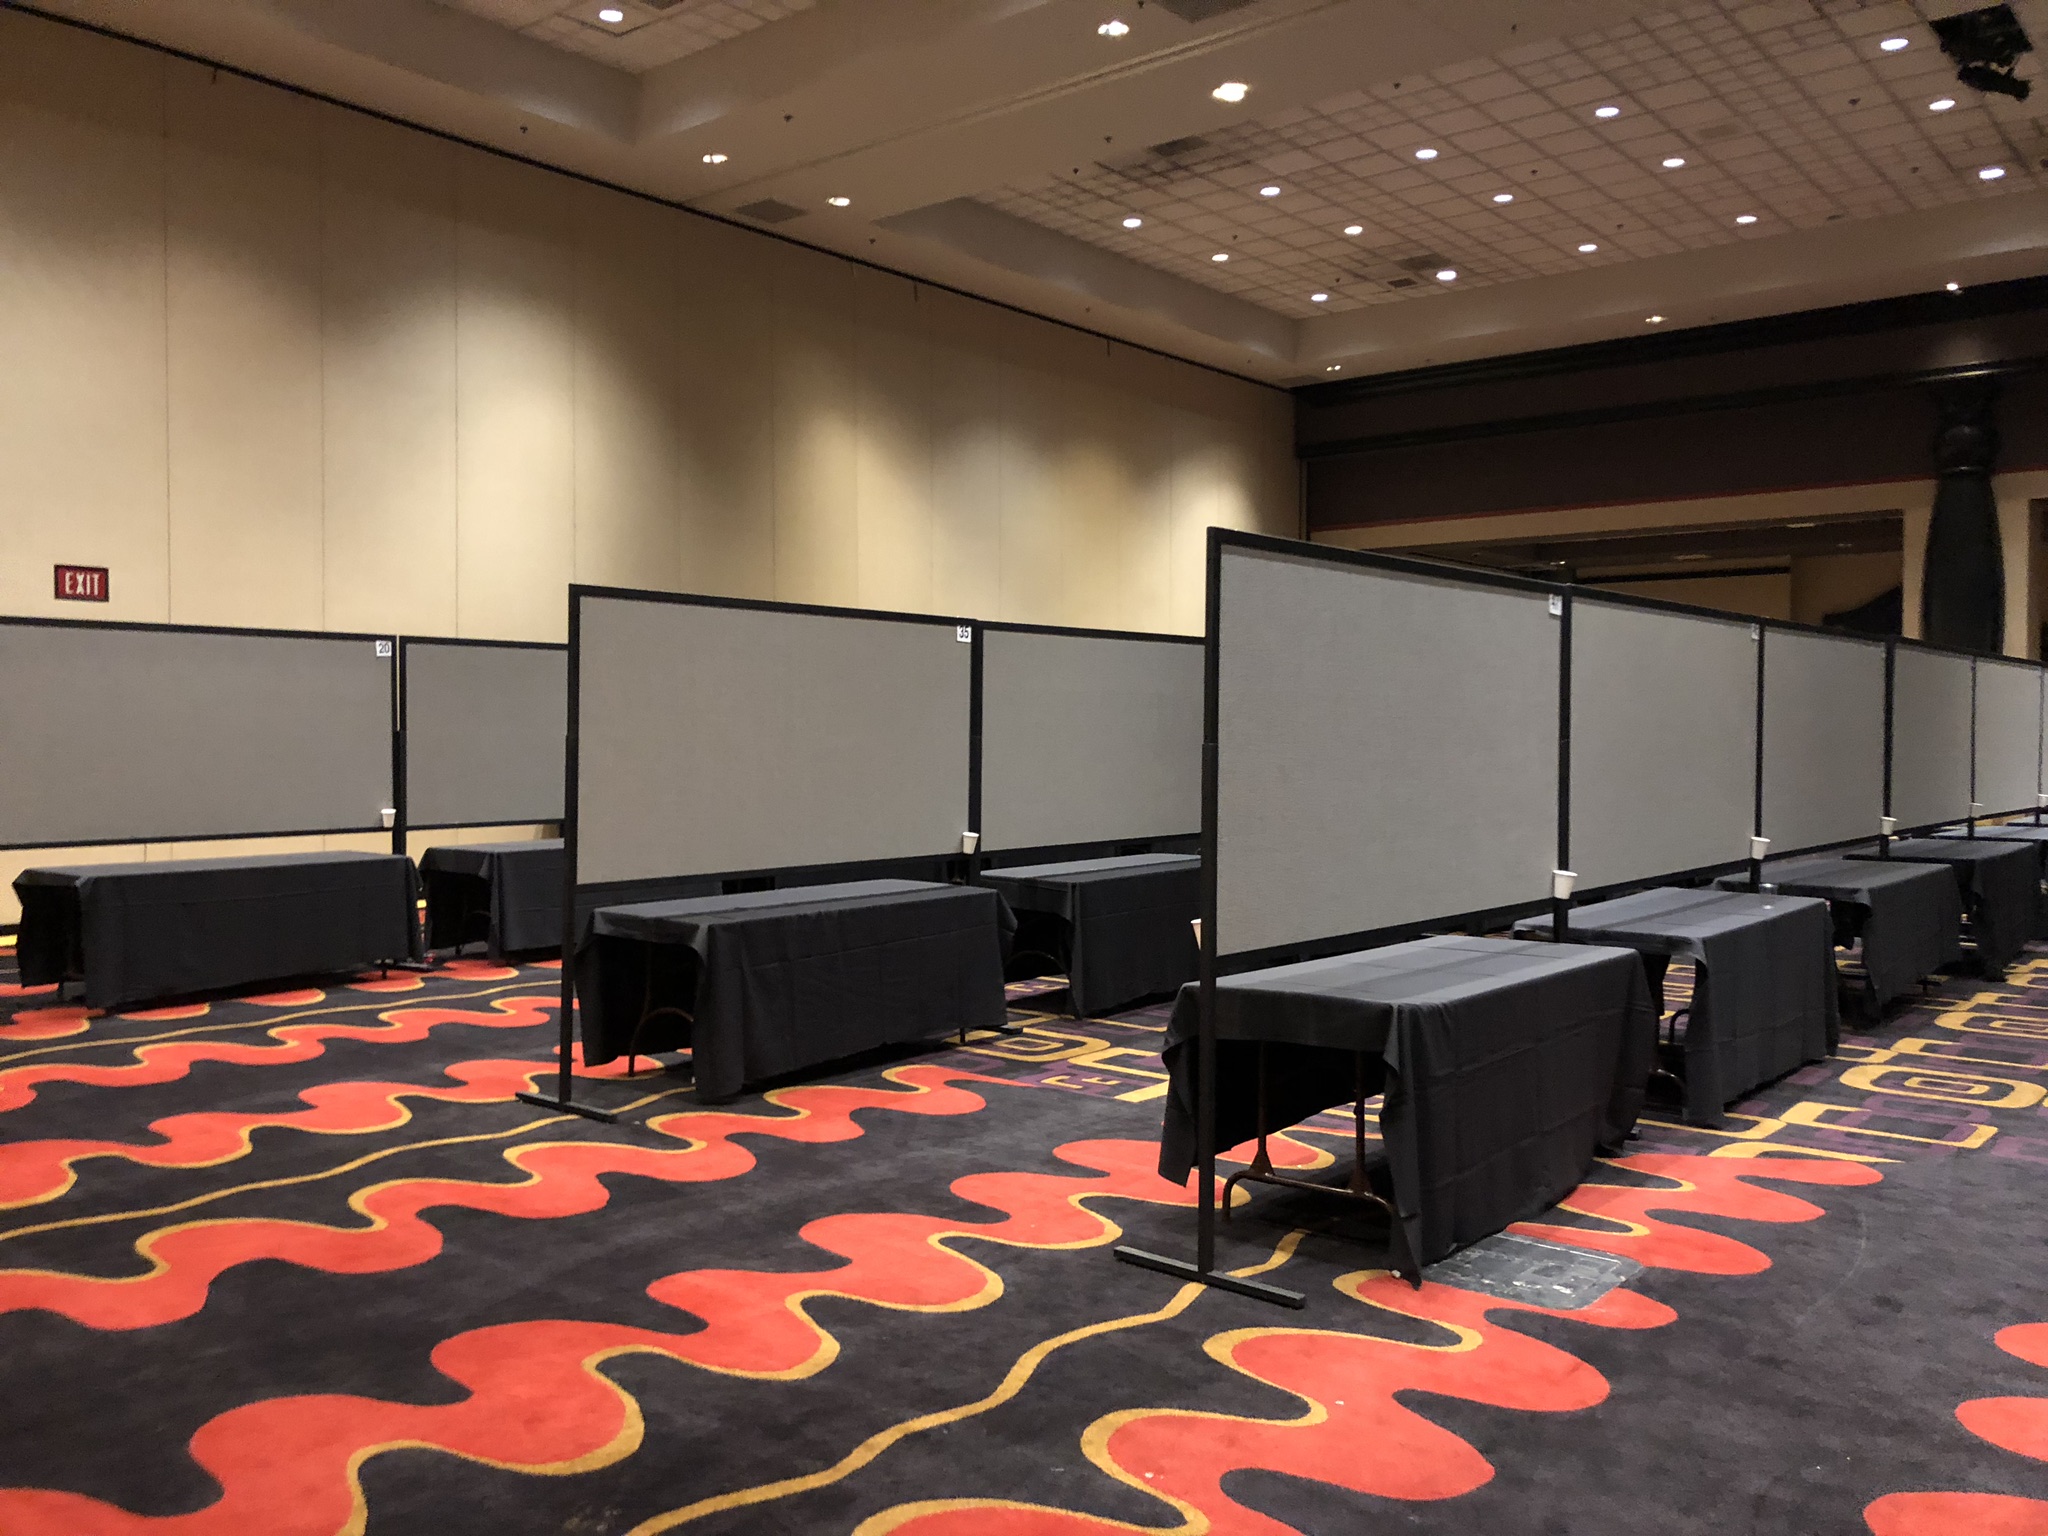 Poster Board Rentals - Poster Session Rentals and Services